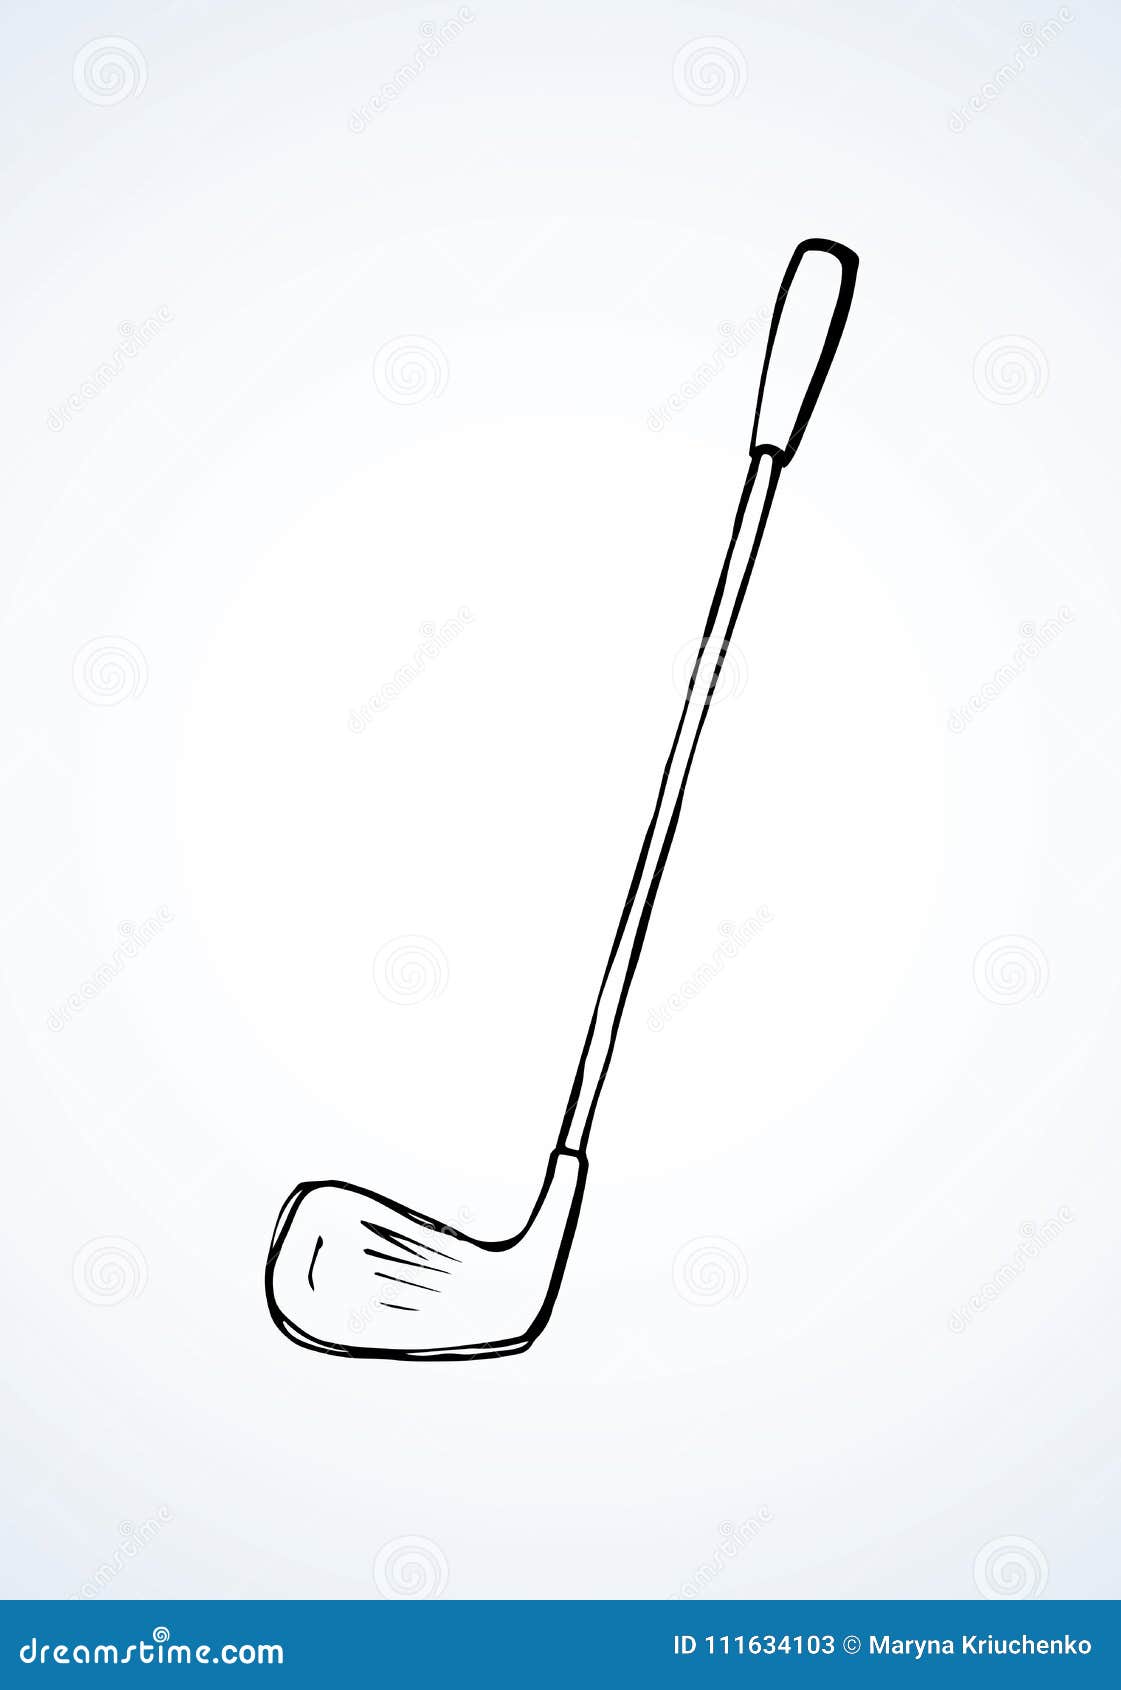 The Golf Club. Vector Drawing Stock Vector - Illustration of doodle, golf:  111634103